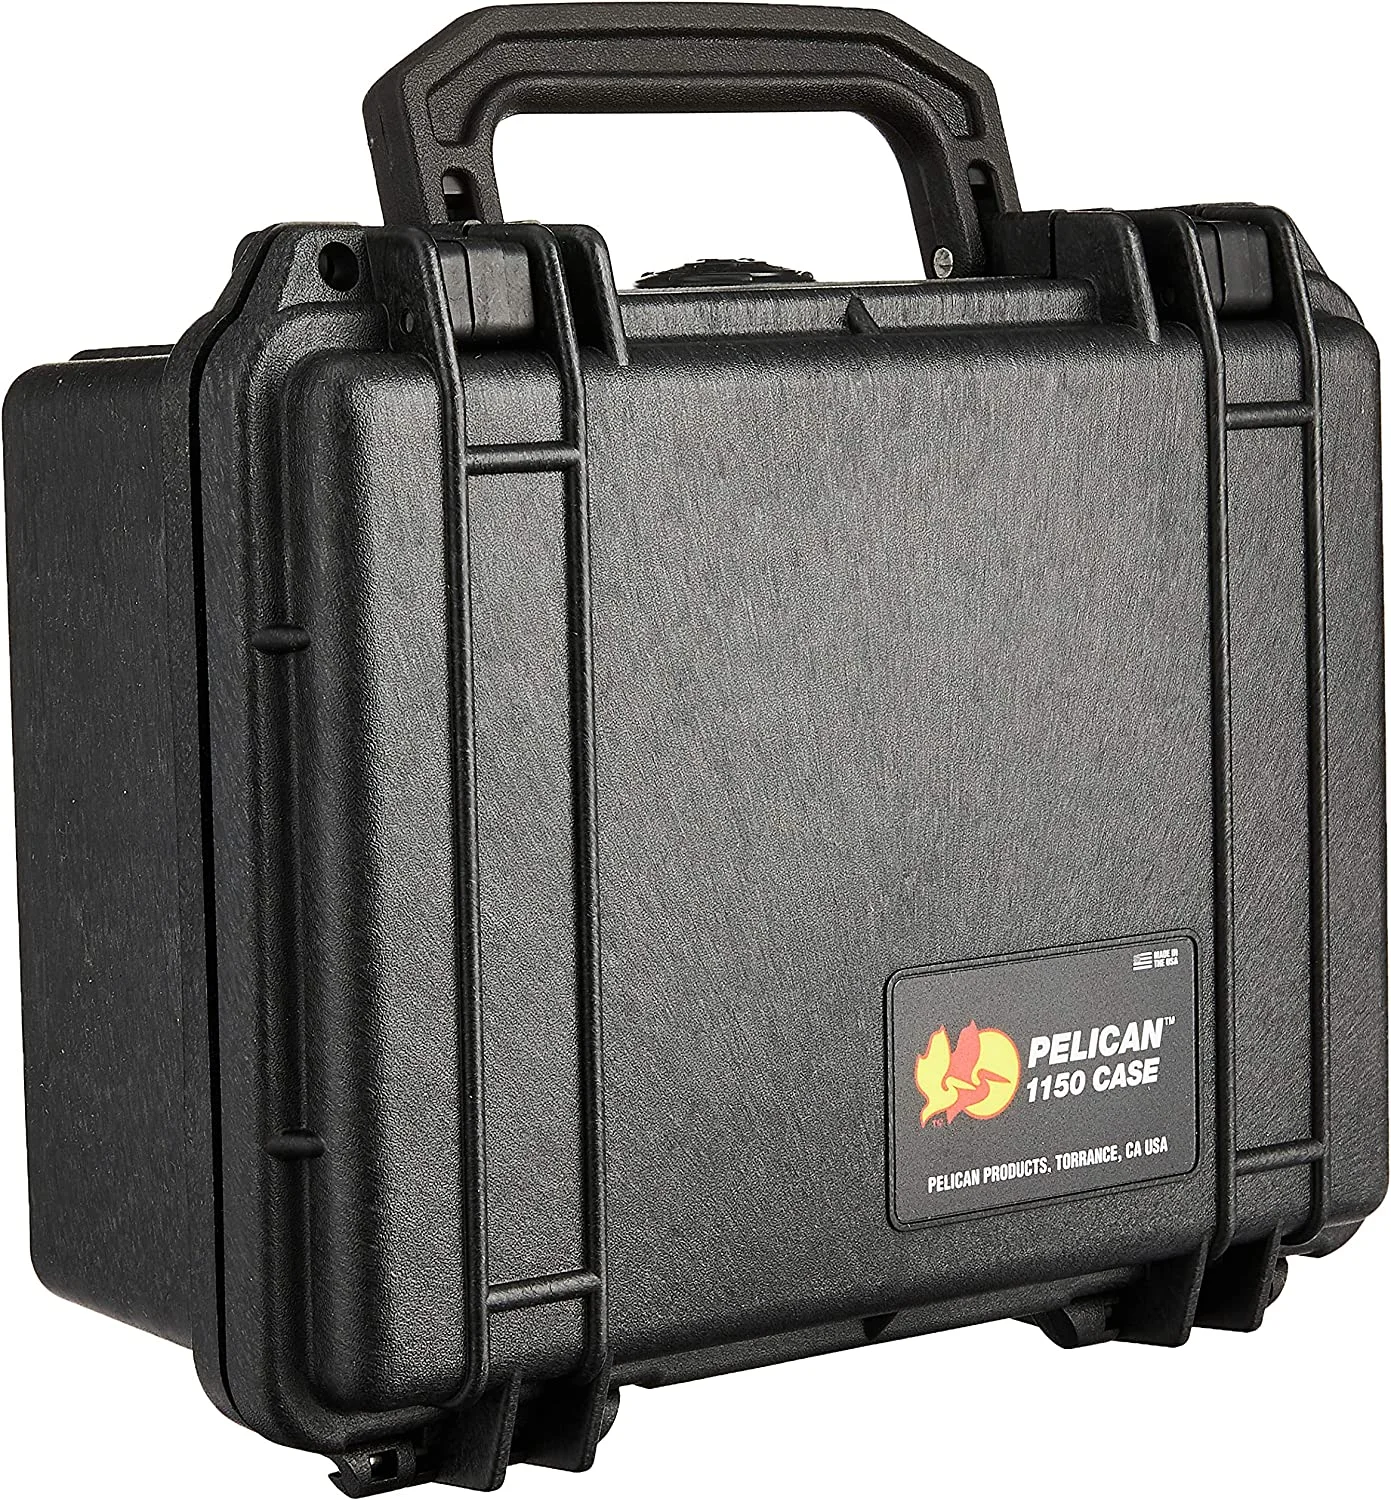 Pelican Products 1150-000-110 Pelican 1150 Camera Case With Foam